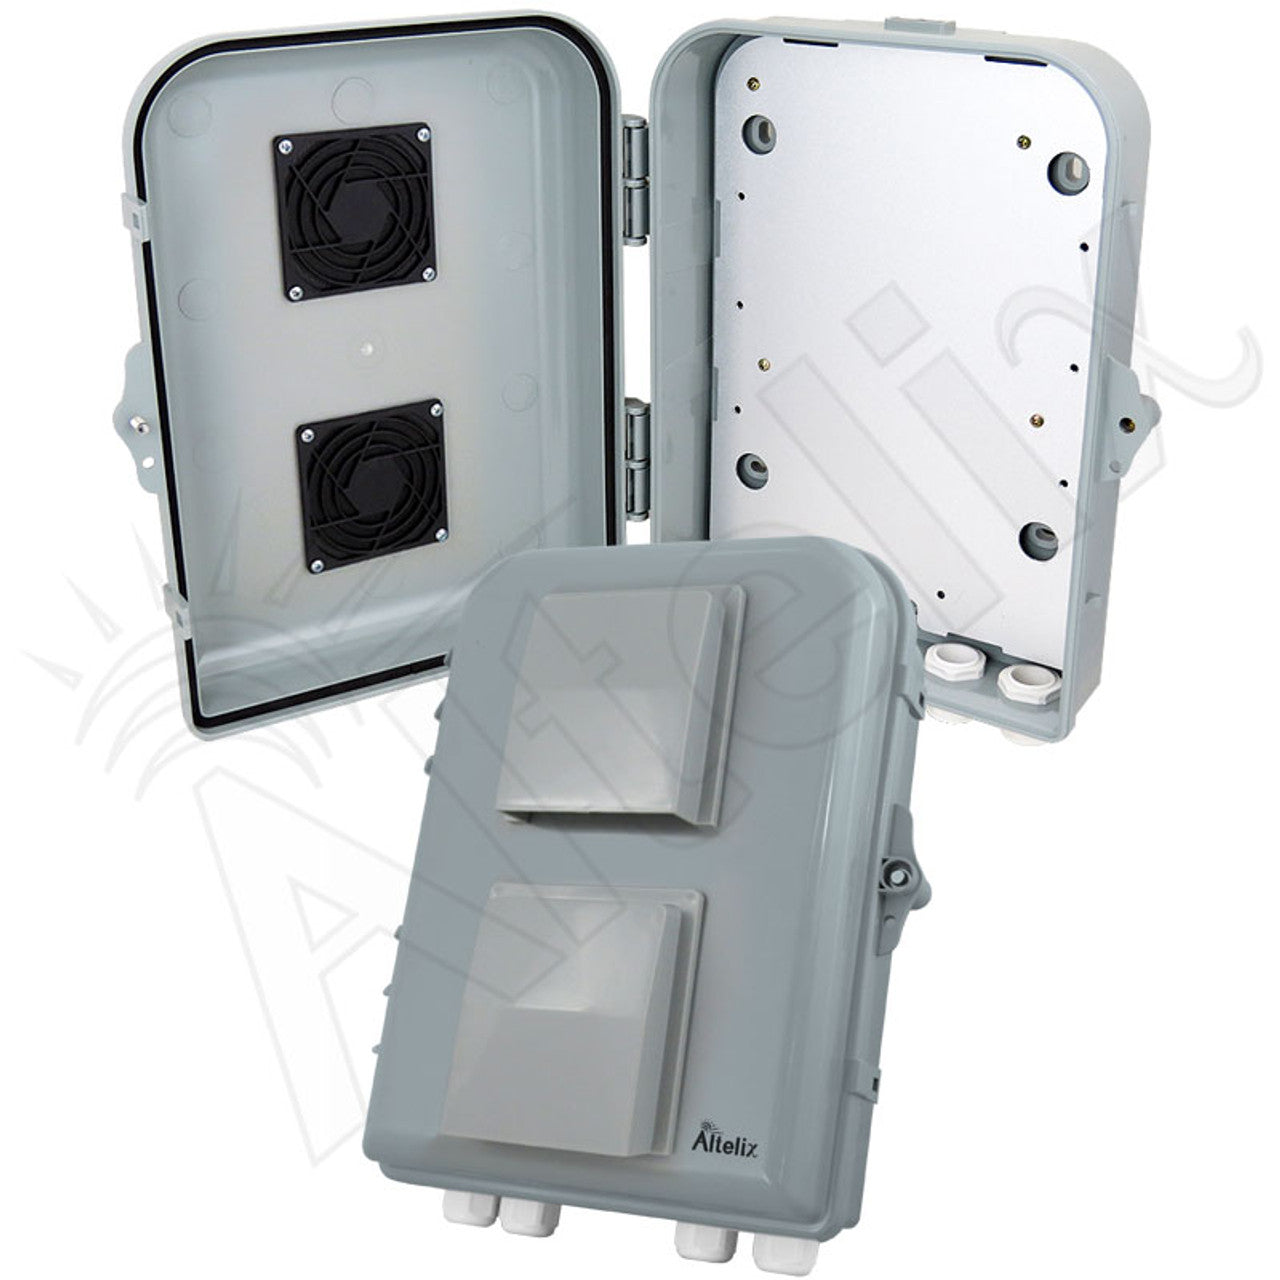 Altelix 13x10x4 PC+ABS Vented Weatherproof Utility Box NEMA Enclosure with Hinged Door and Aluminum Mounting Plate